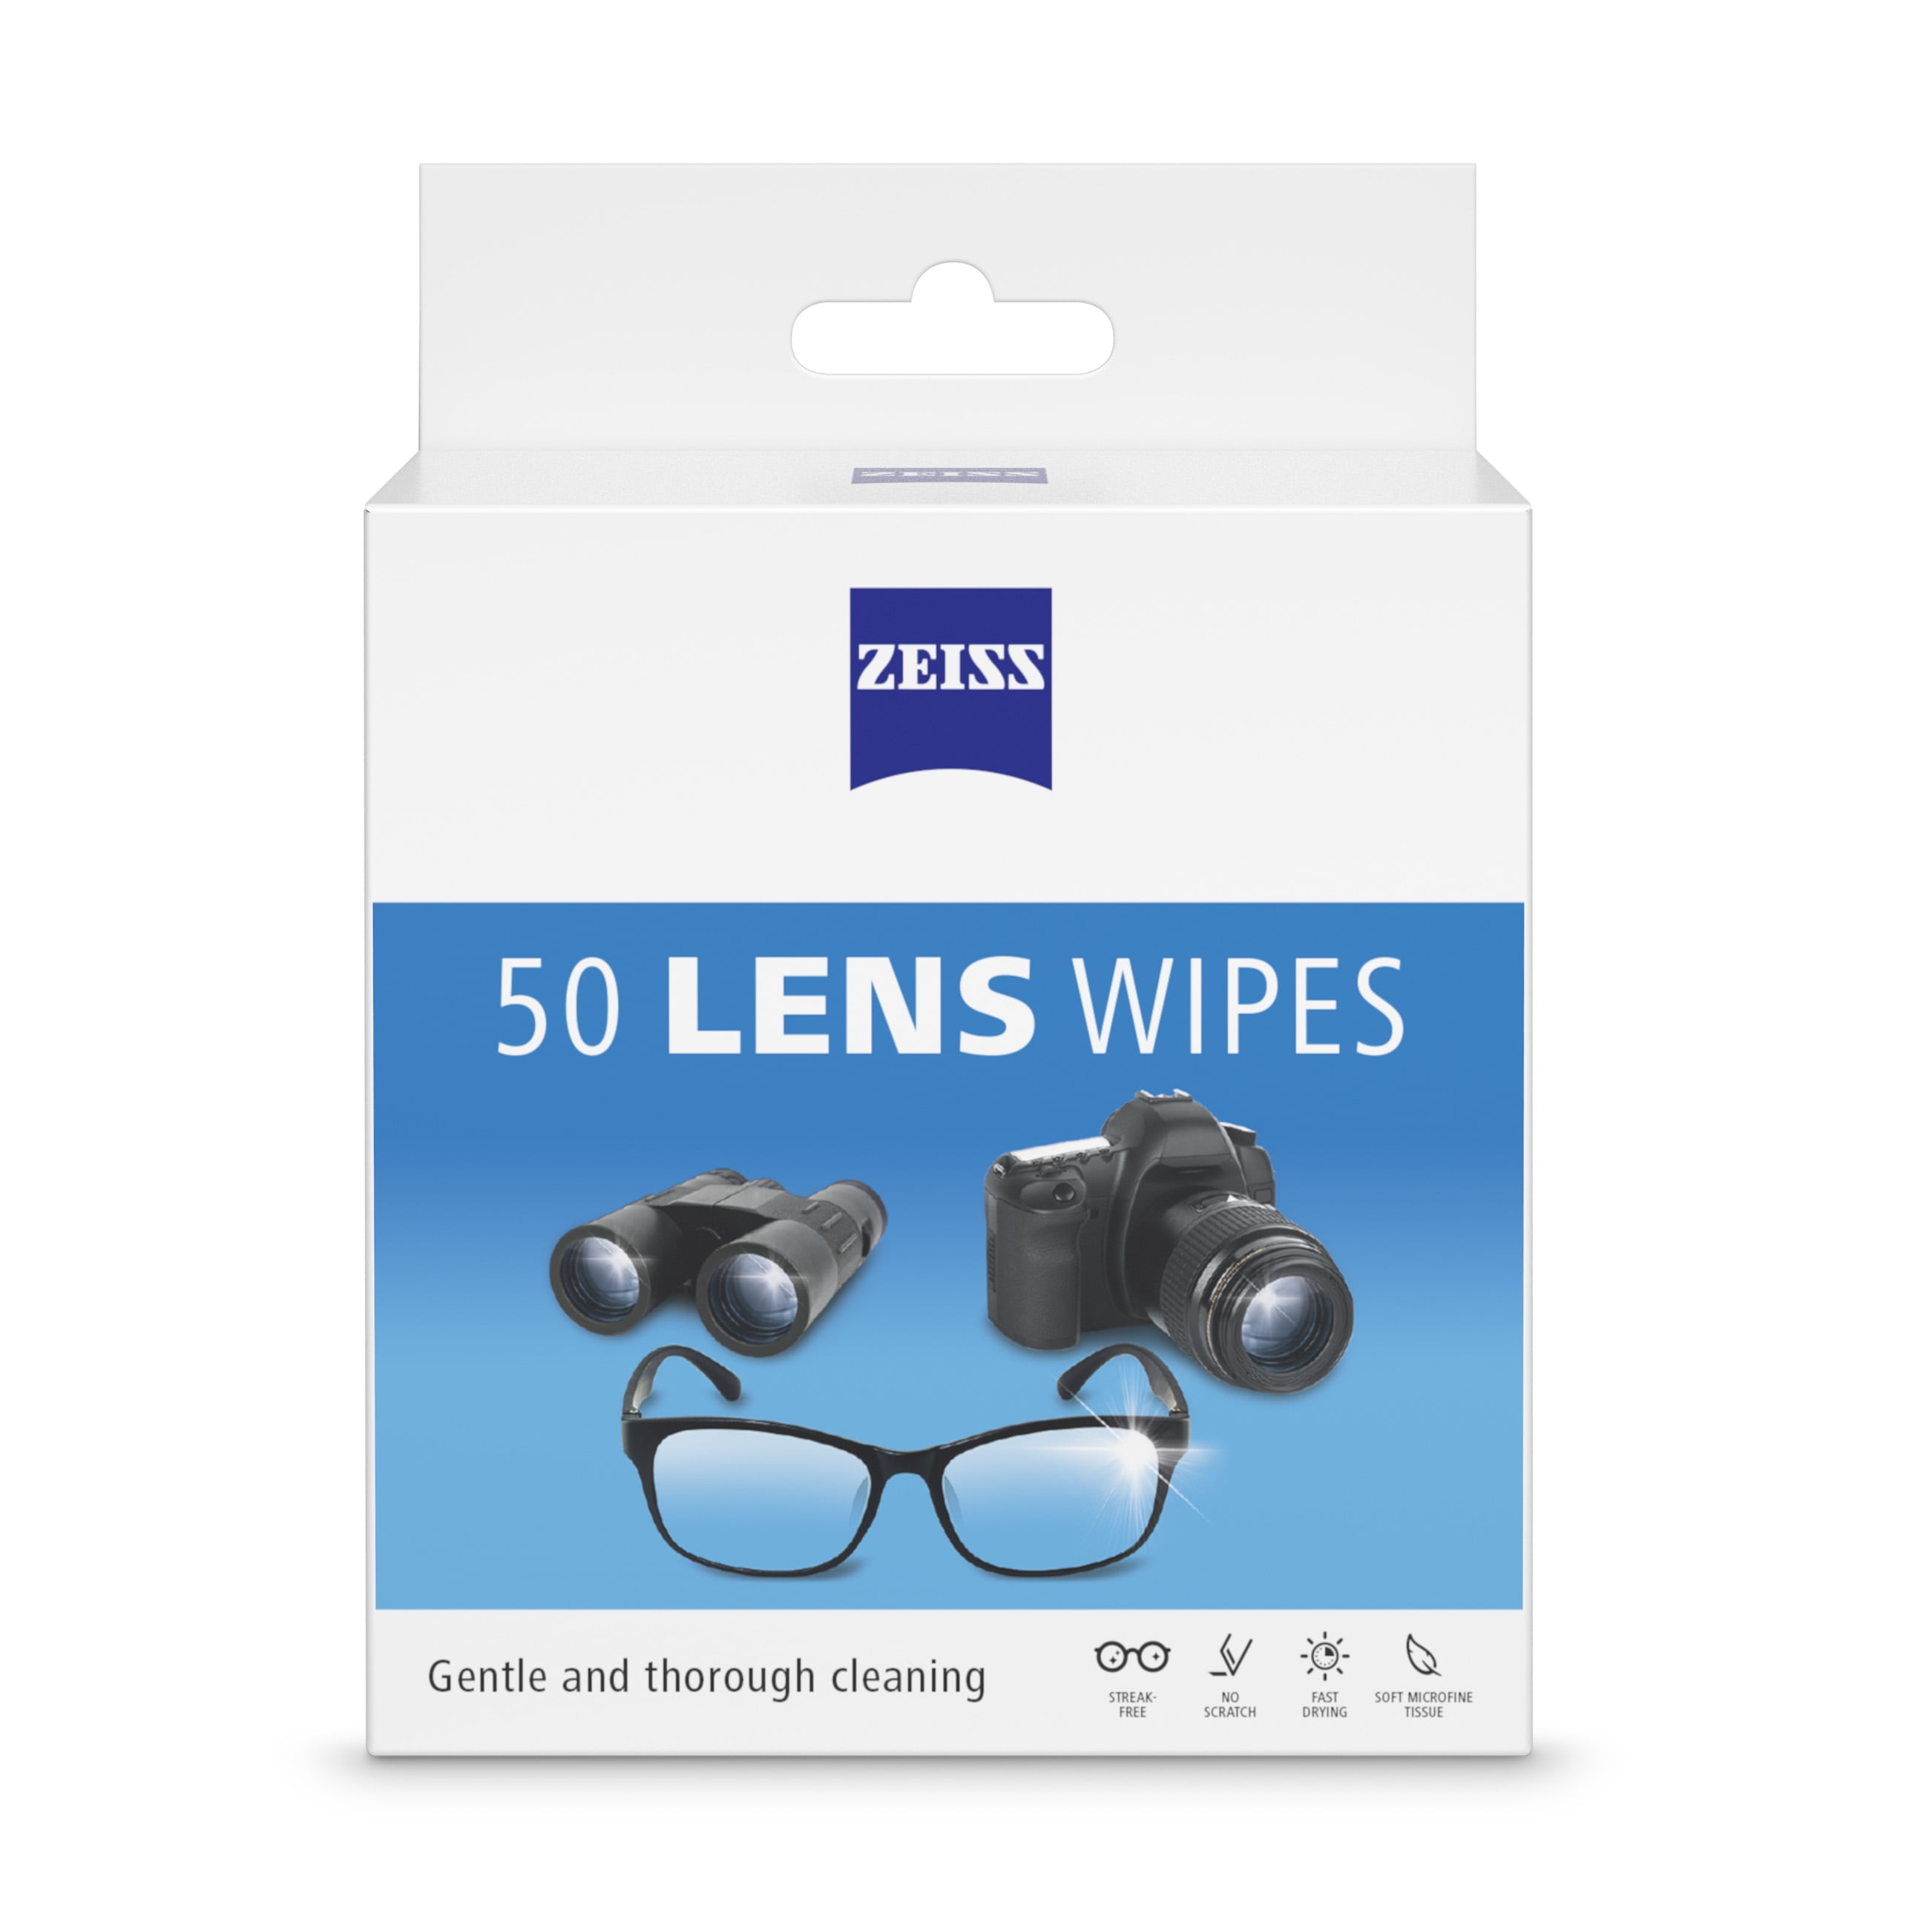 ZEISS Lens Wipes, Pre-Moistened Eye Glass Cleaner Wipes, 50 Count